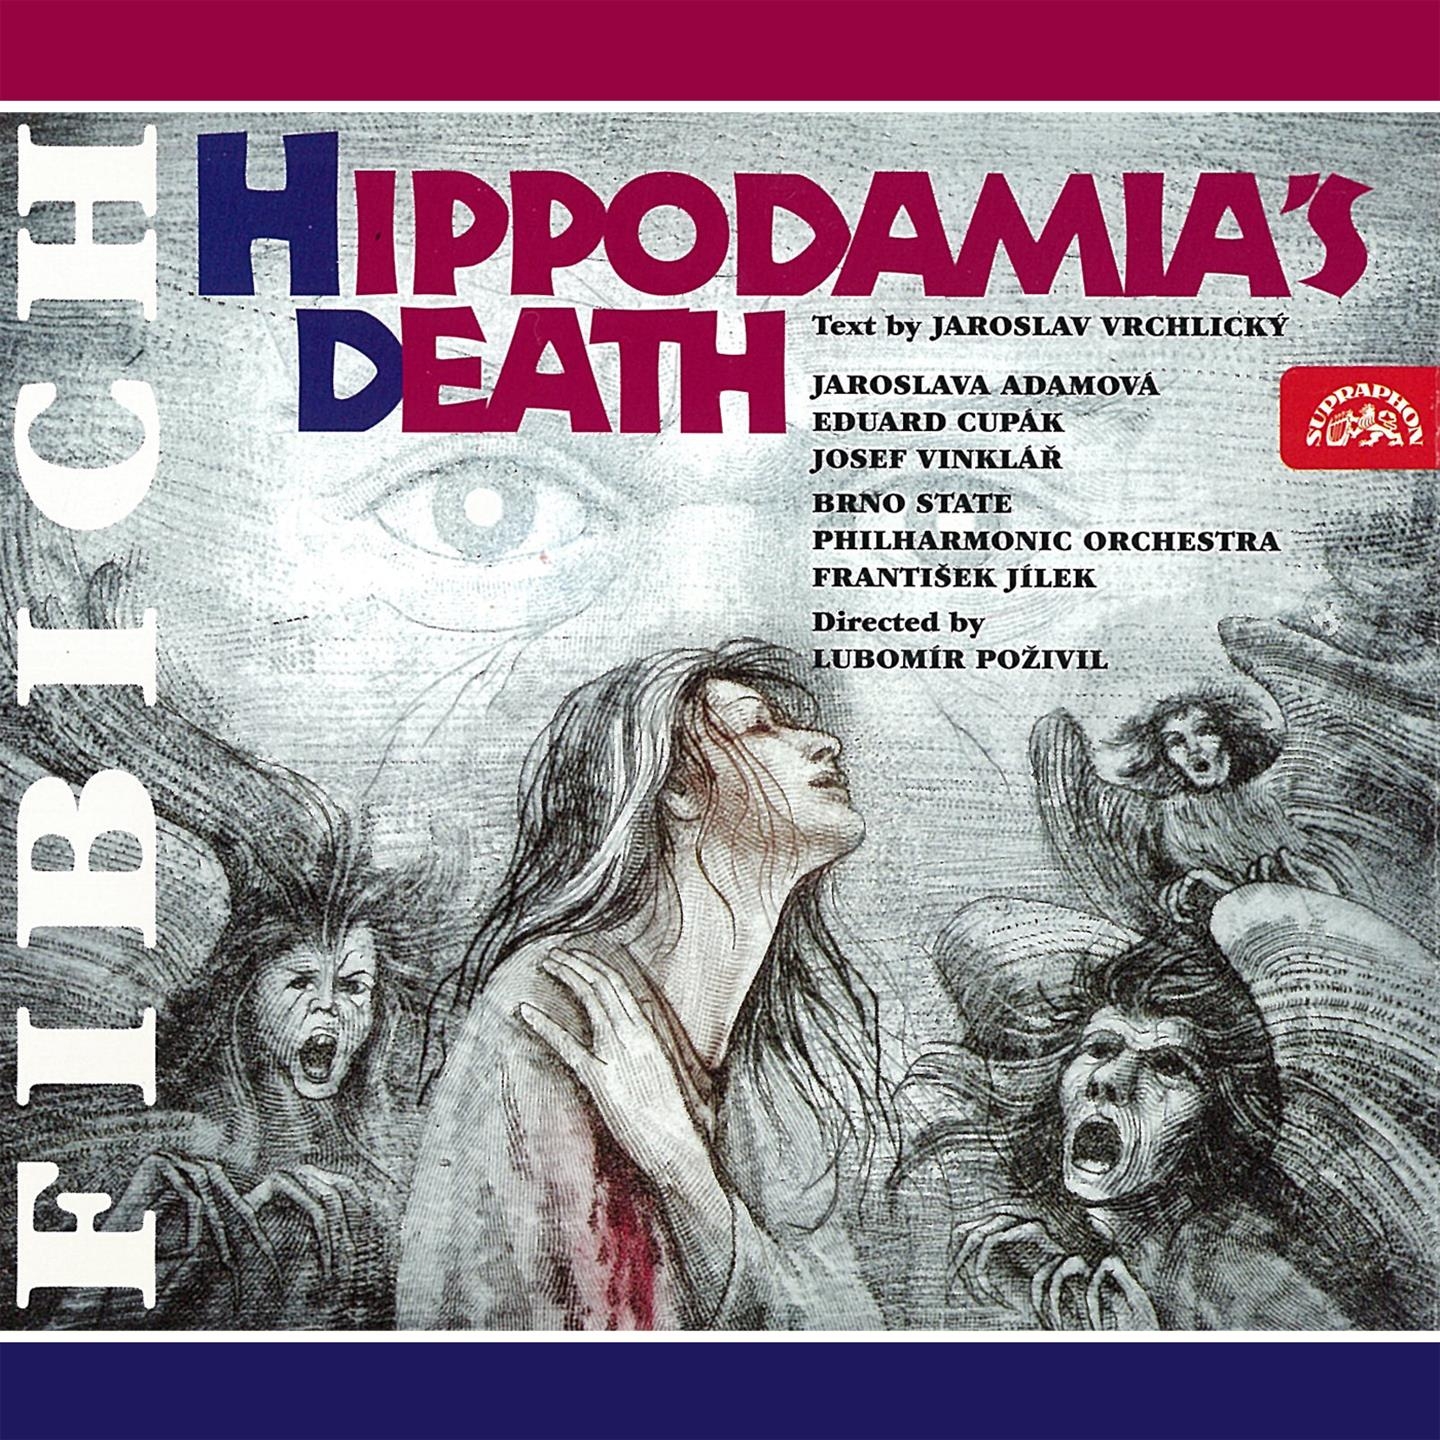 Hippodamia s Death, Op. 33, .: Act 1, Scene 8: What Have I Done Now?